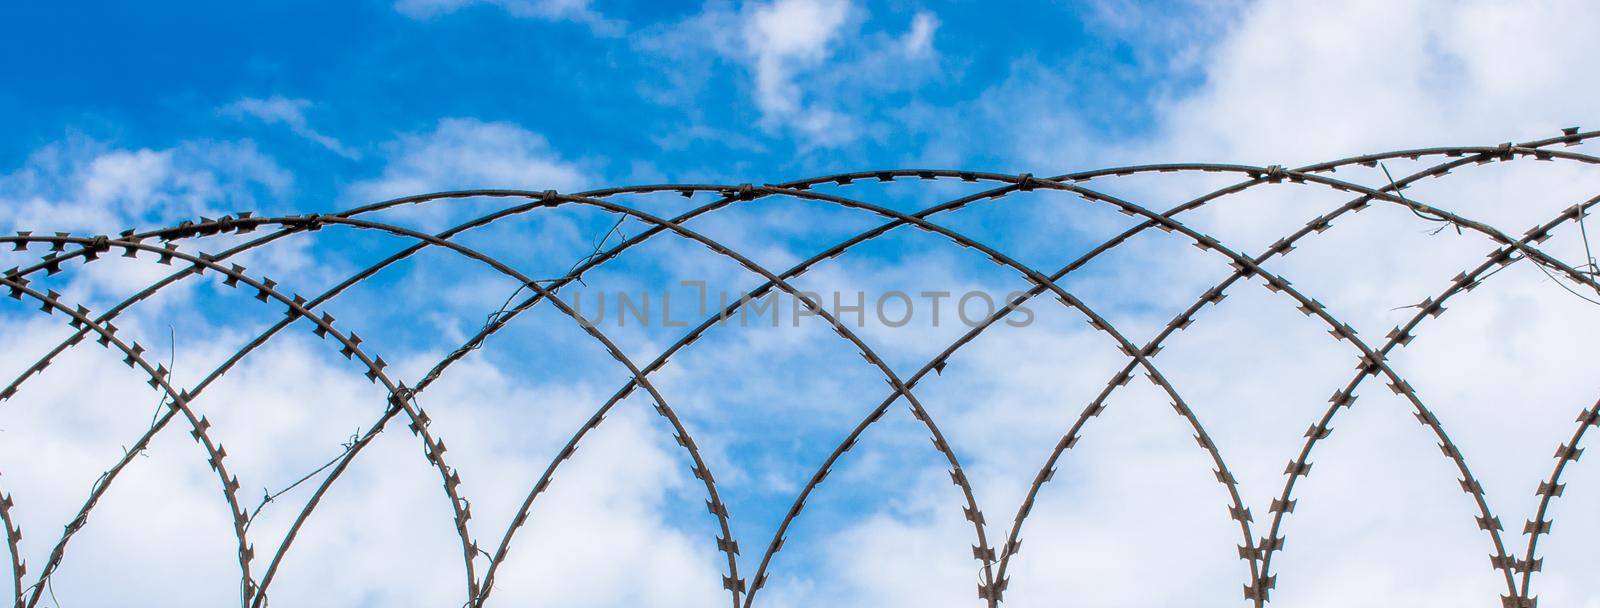 barbed wire fence  in a field